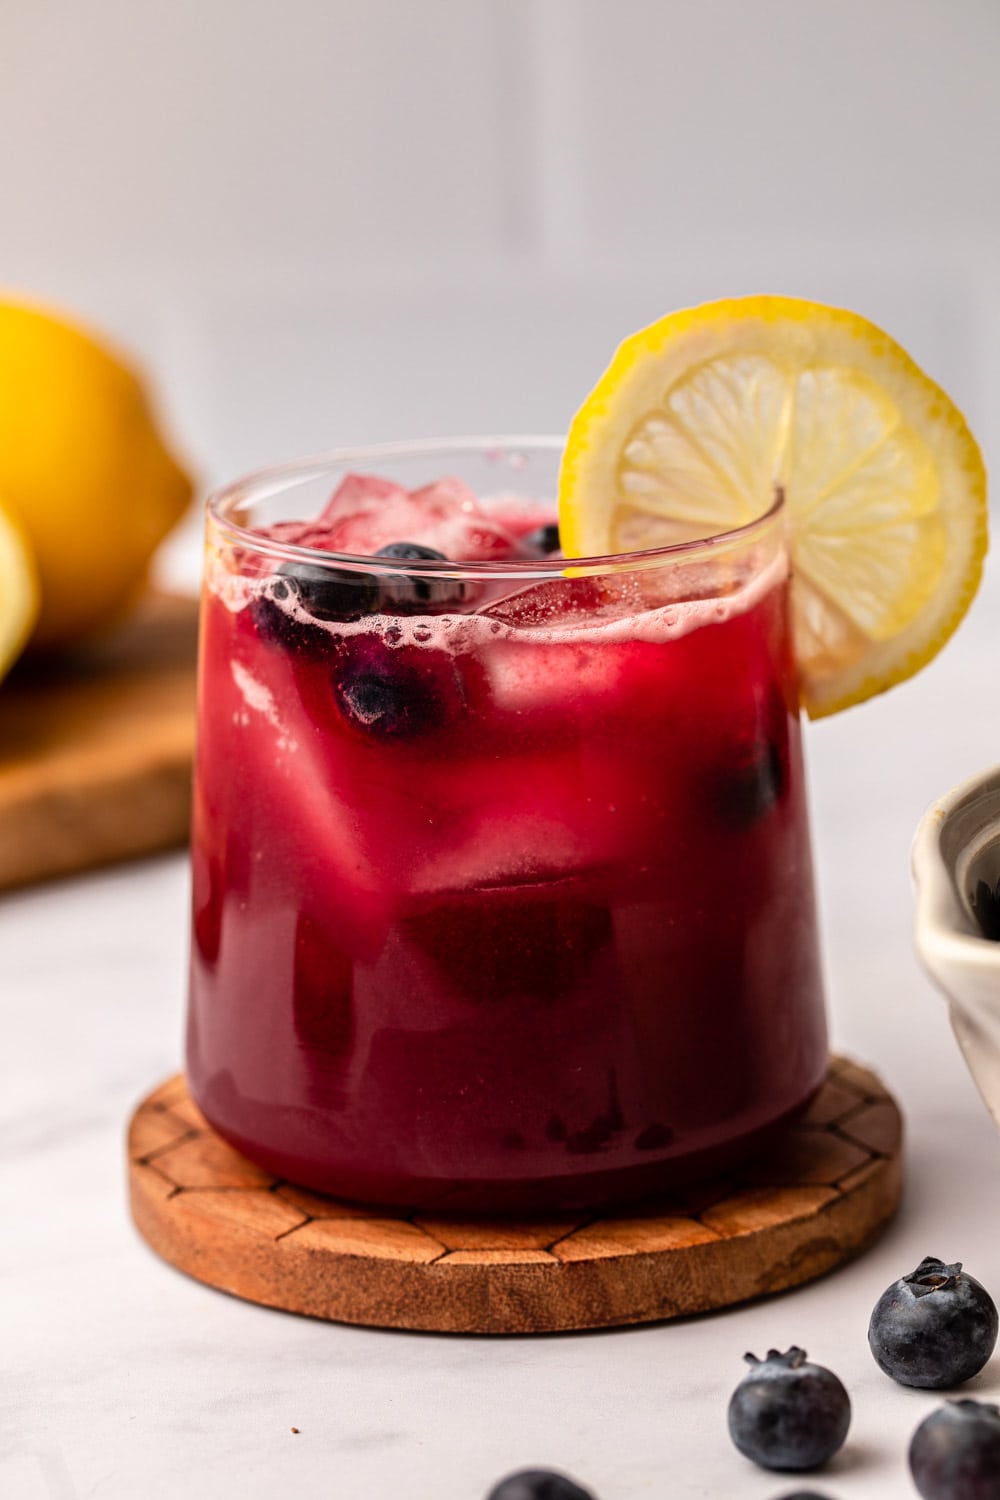 blueberry lemonade served in a glass with a slice of lemon as decoration